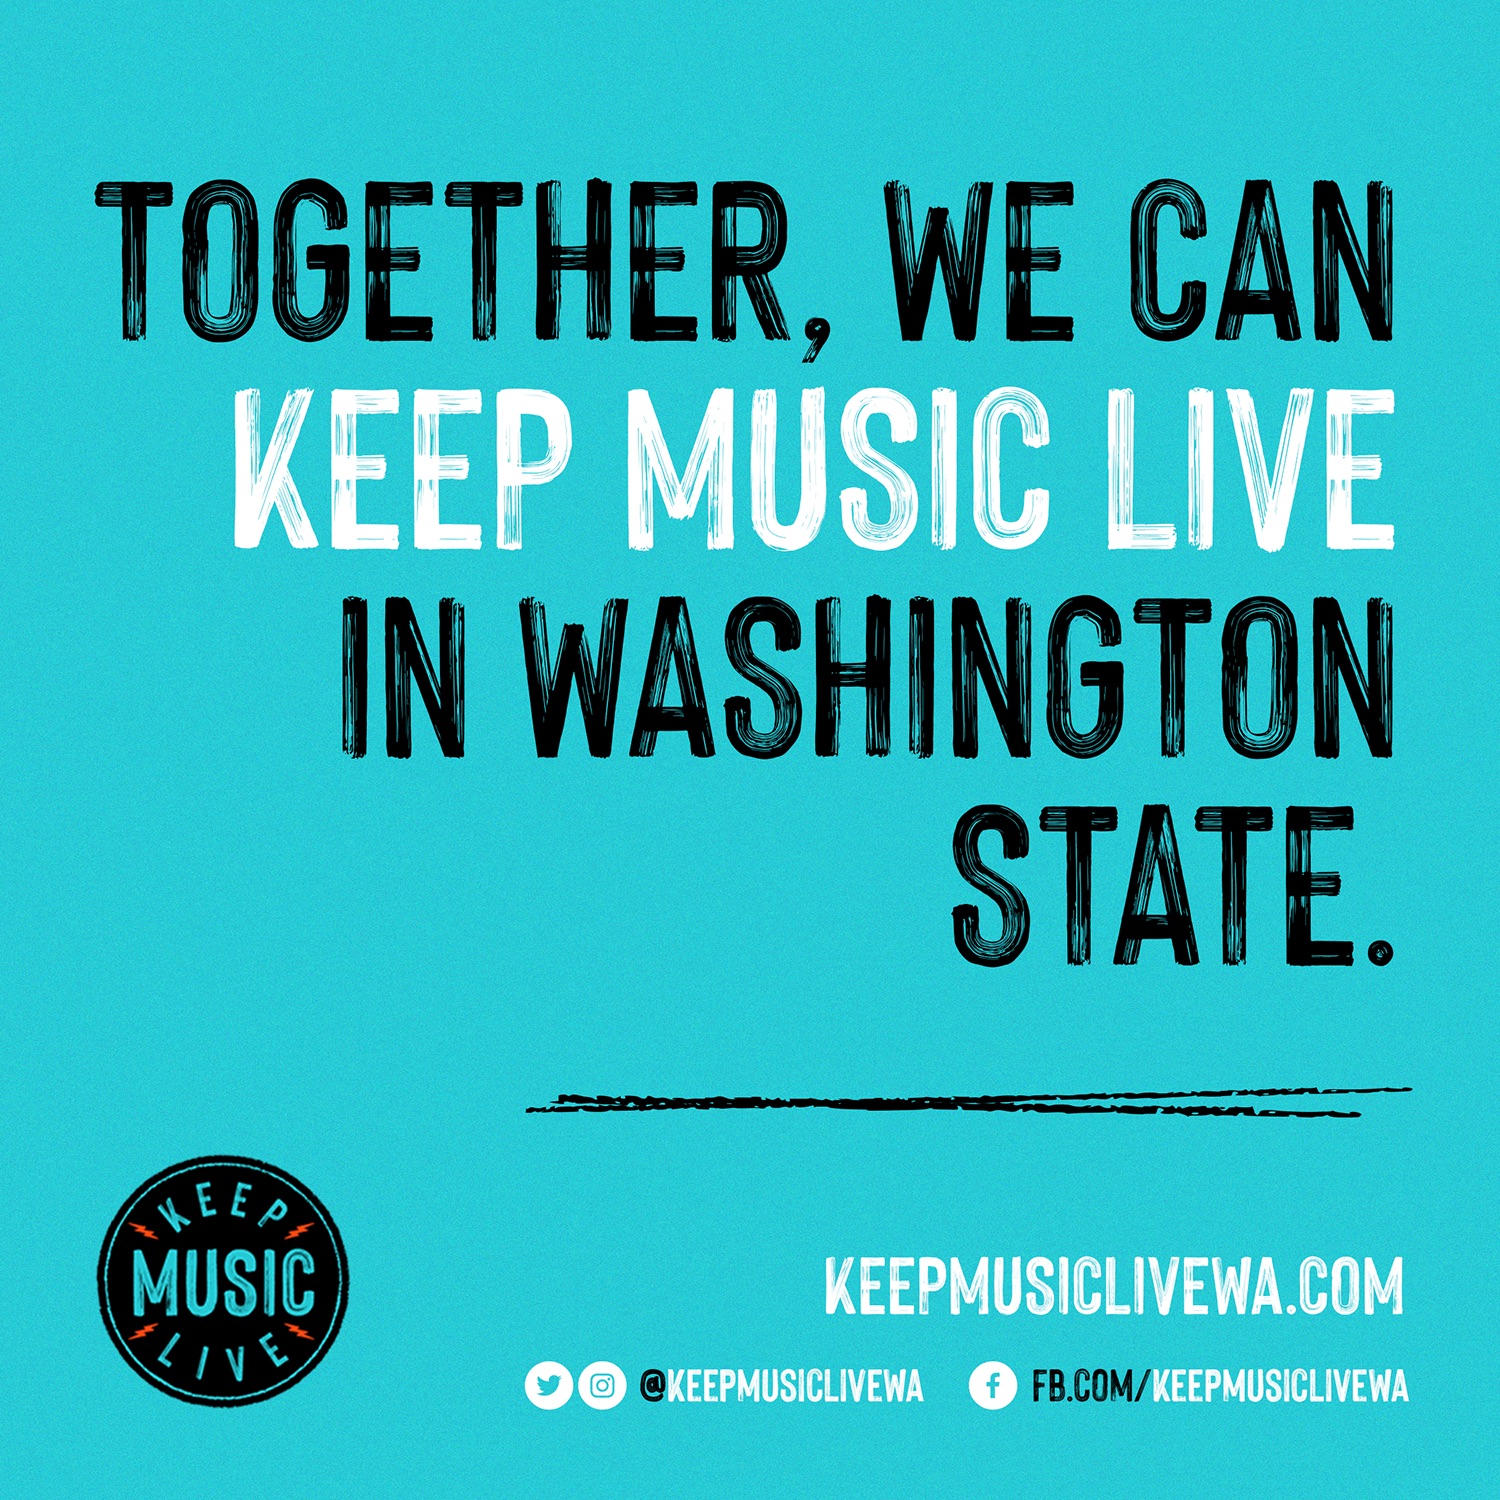 Logo for the Keep Music Live campaign